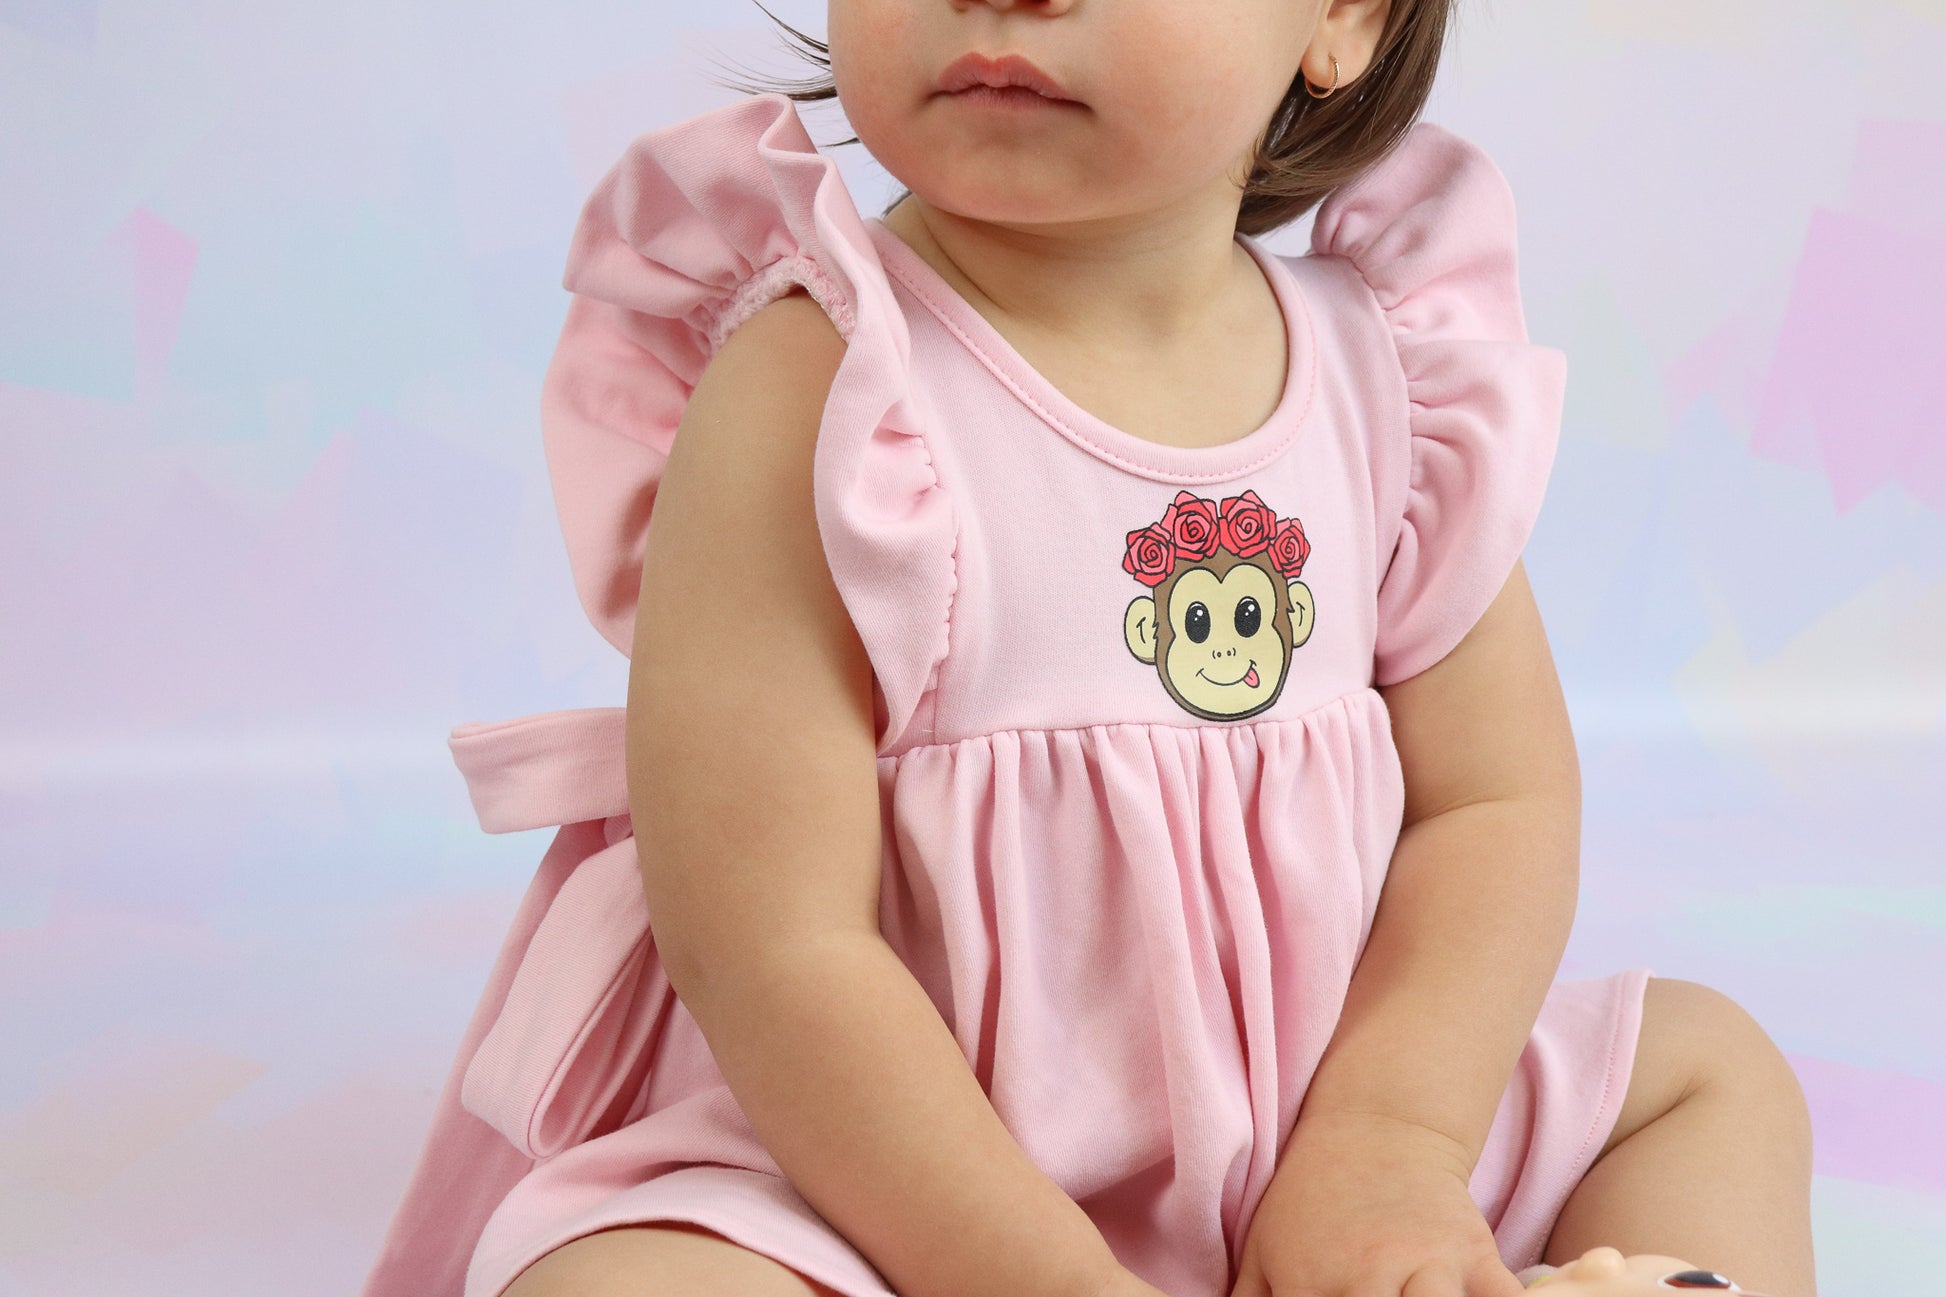 toddler girl sitting down wearing a pastel pink dress with a cute monkey face printed on it